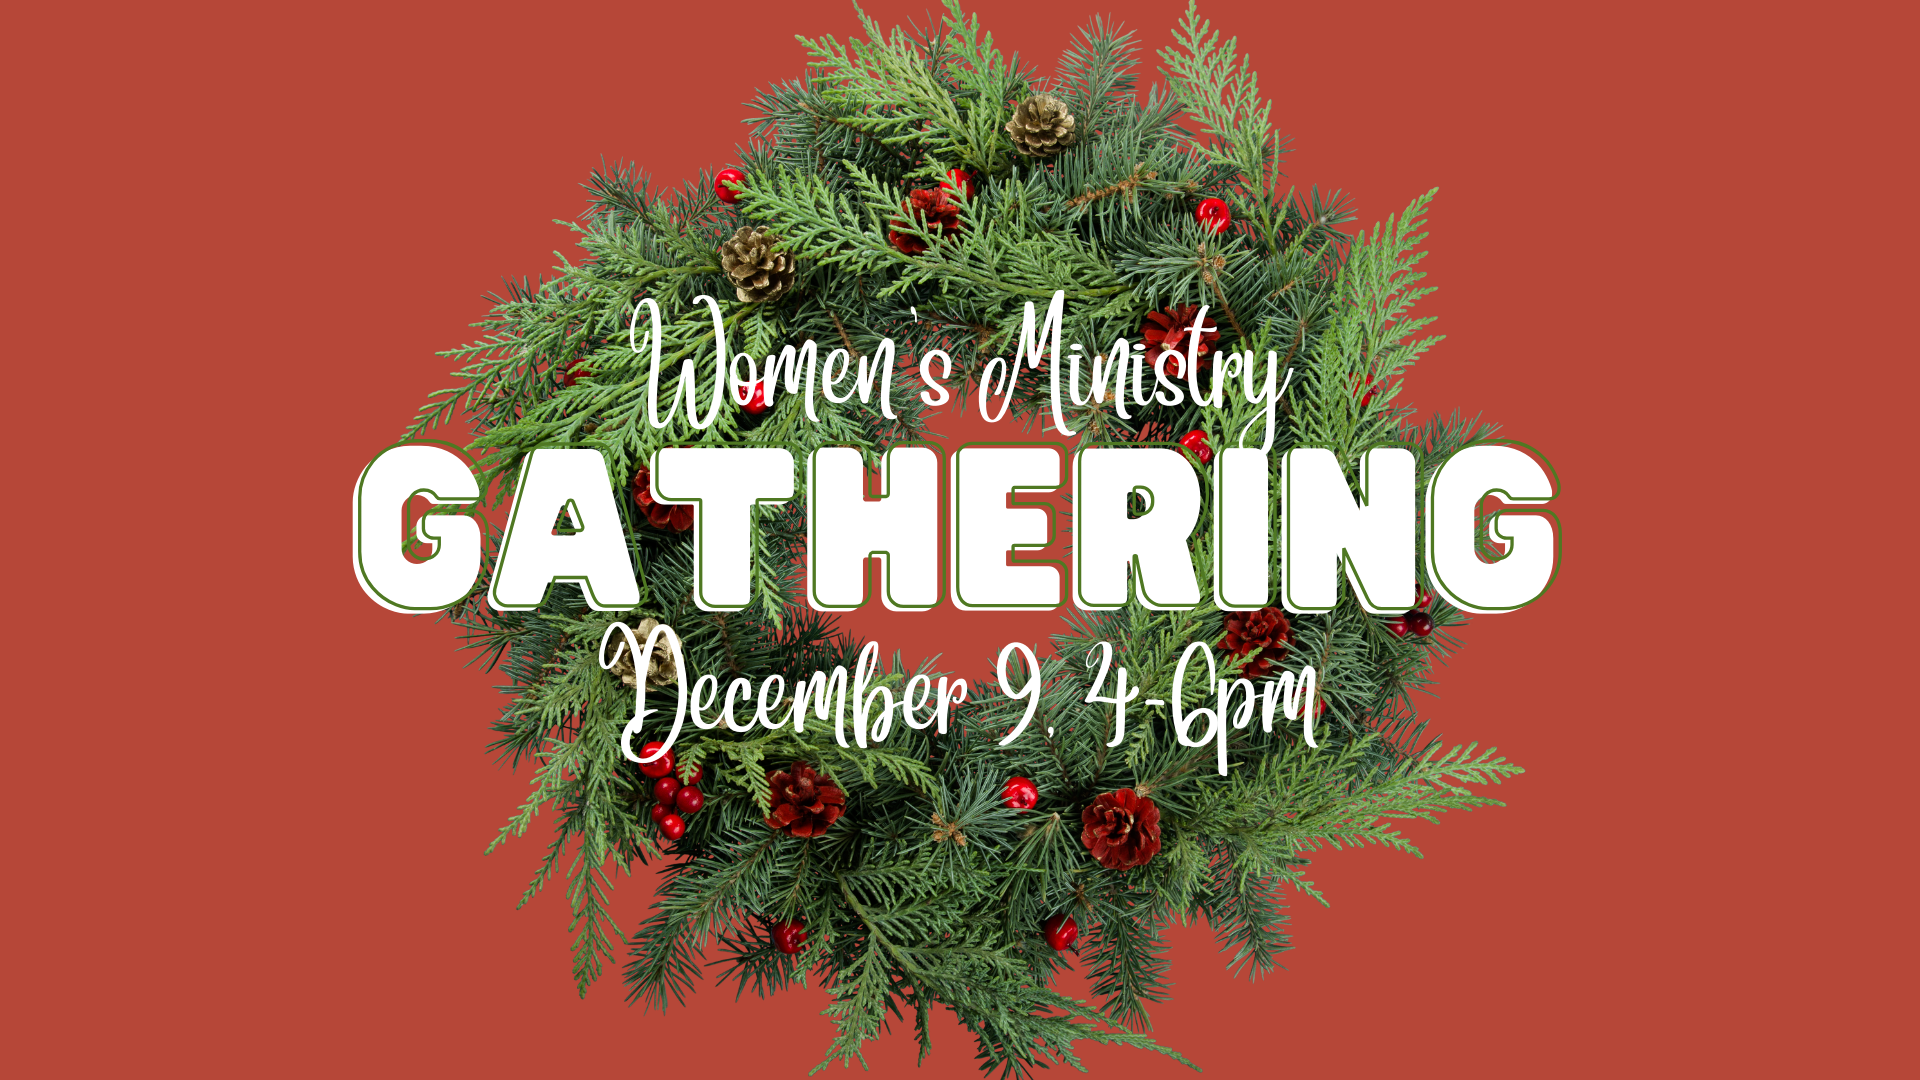 Women's Ministry Christmas Gathering